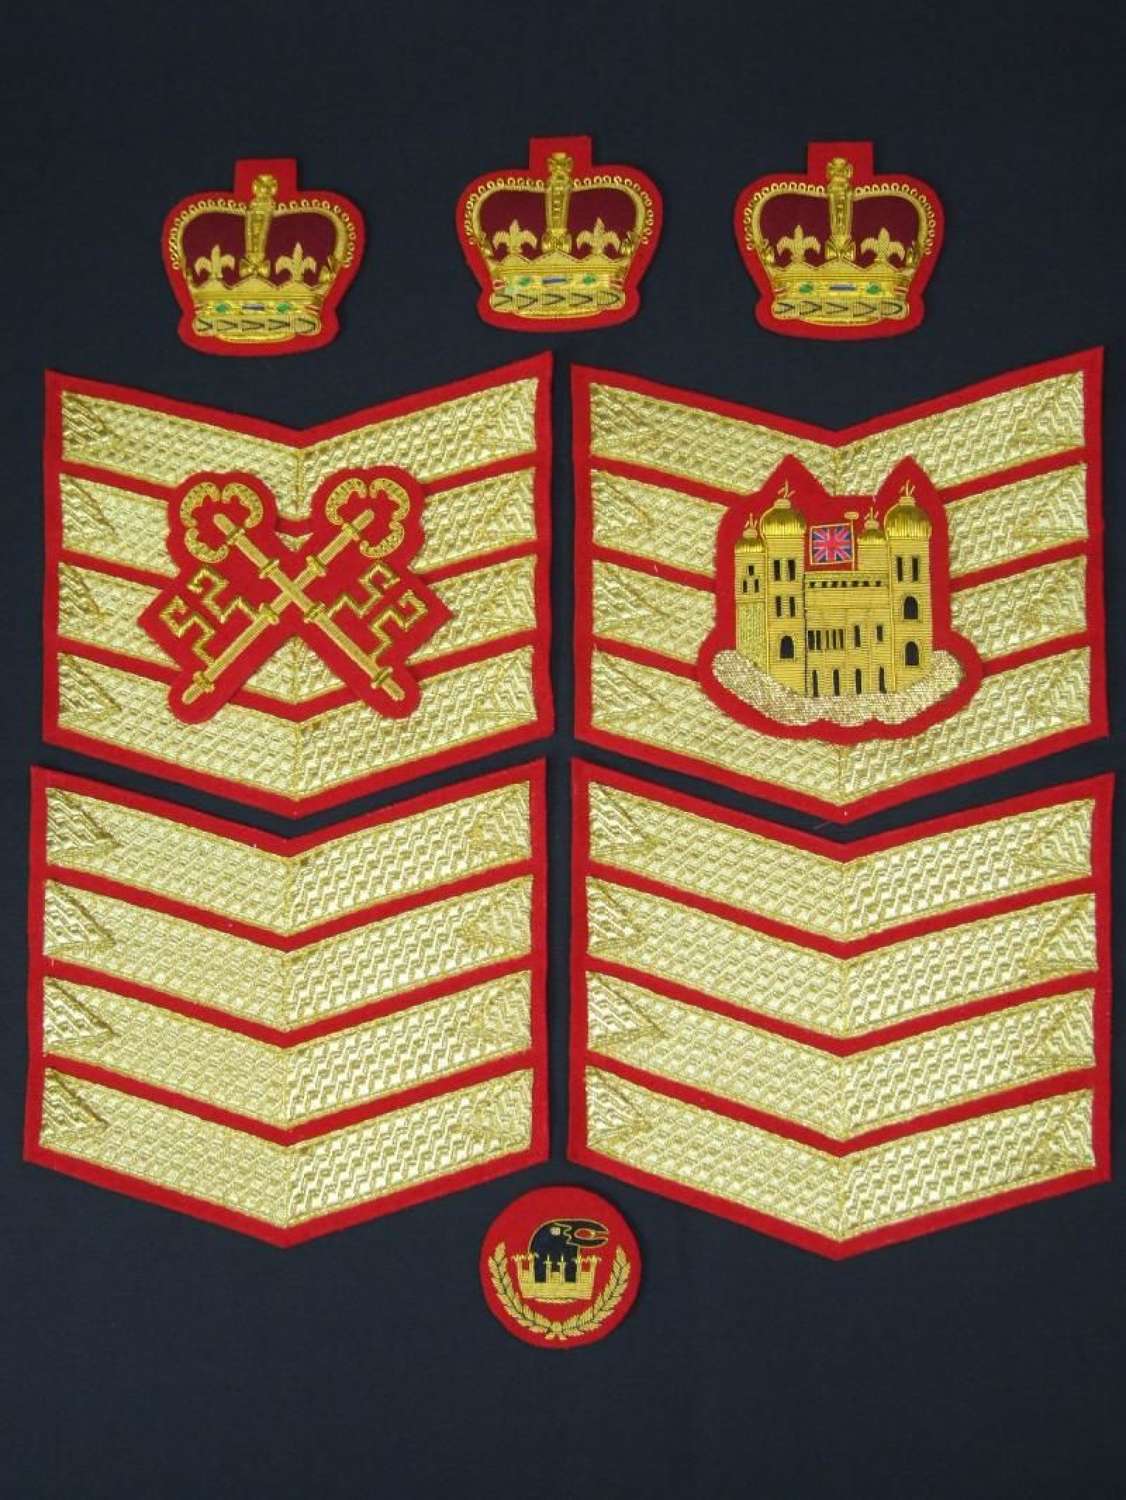 A collection of Yeoman Warden's (Beefeaters) Insignia